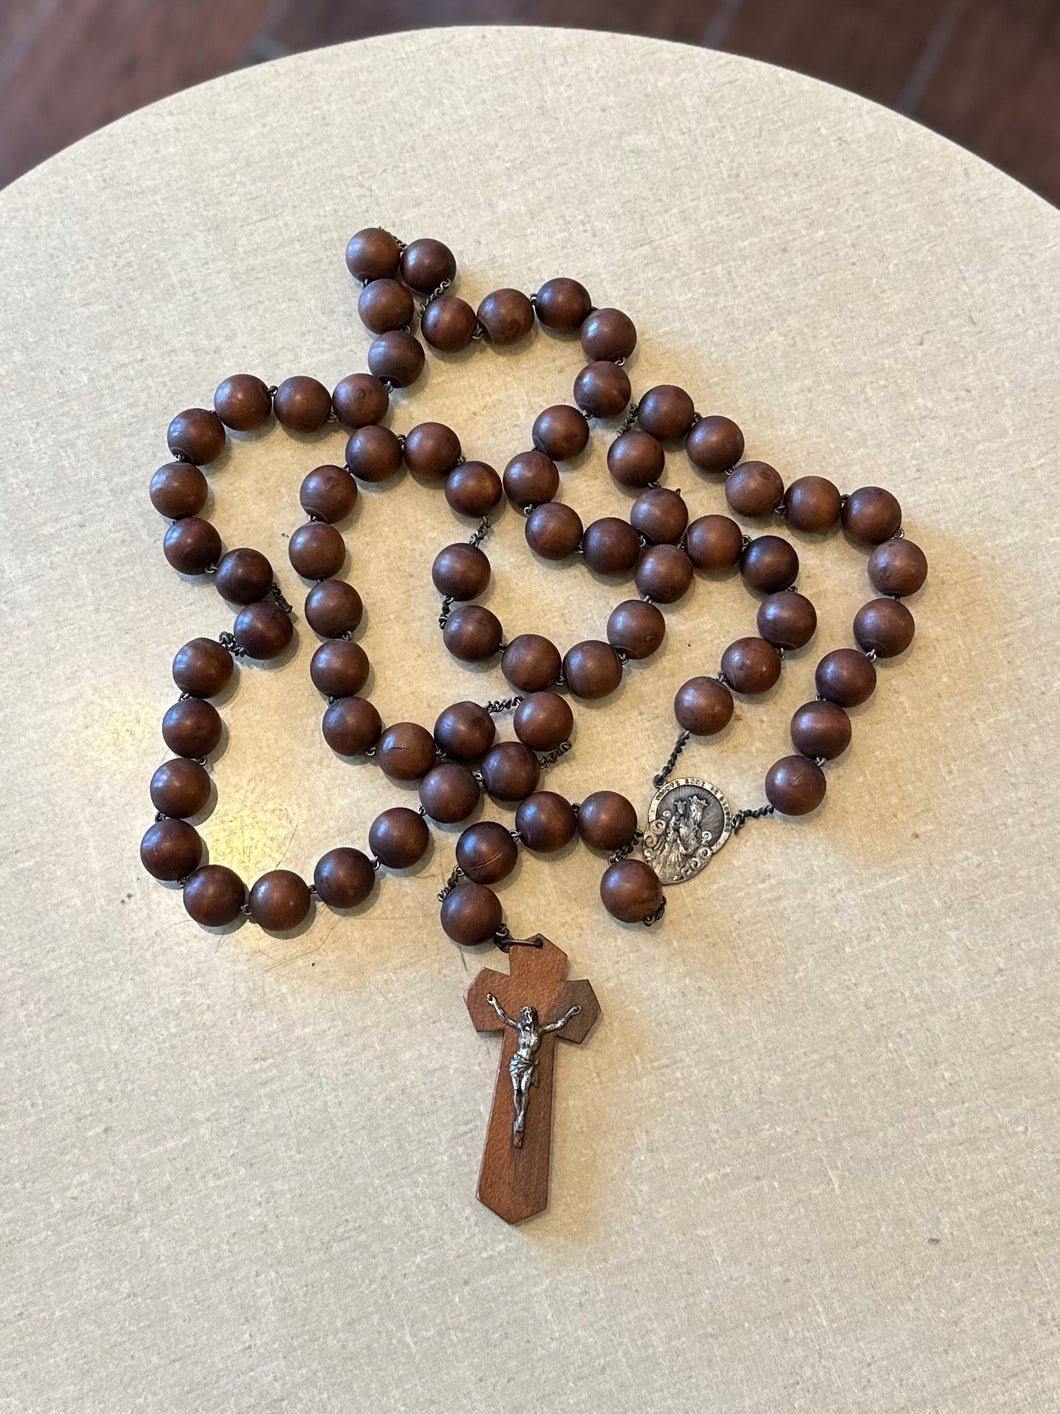 Vintage 1930s St Ann De Beaupre Large Wood Wall or Habit Rosary France Religious